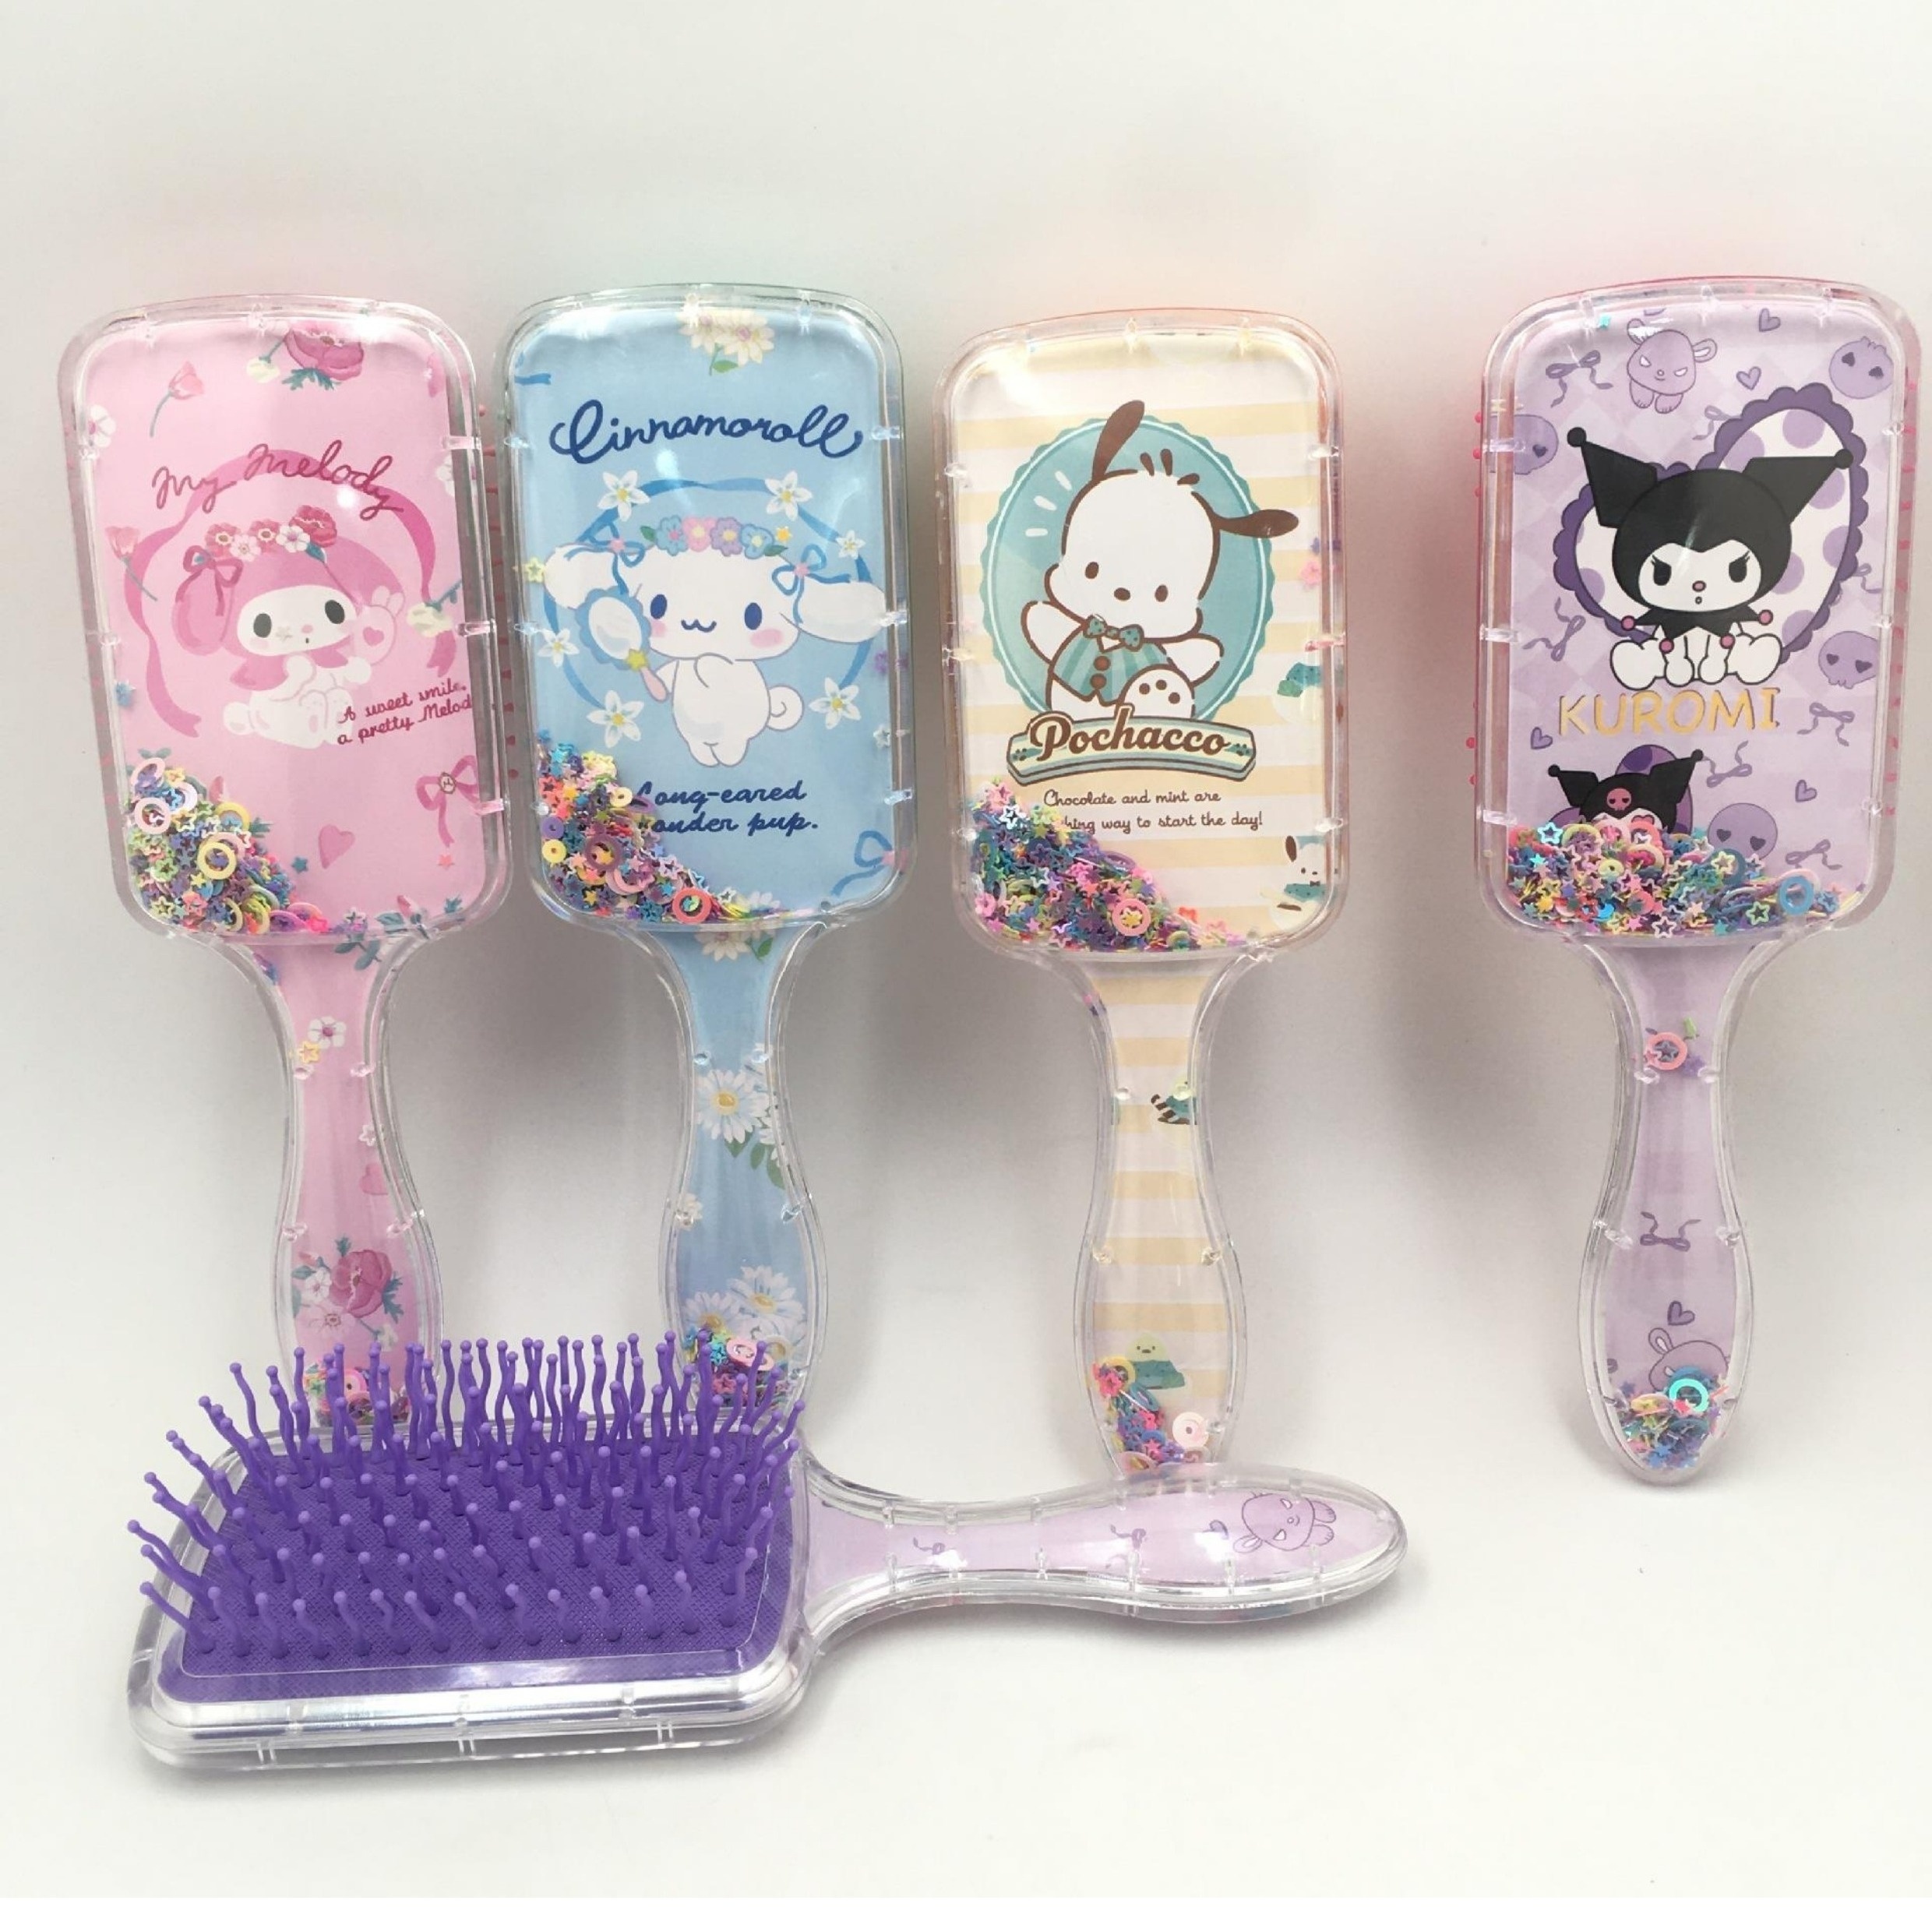 

Sanrio-inspired Hairdressing Comb - Cute Cartoon Design With My Melody, Kuromi & Pochacco - Rubber Bristles For All Hair Types - Perfect Gift For Girls